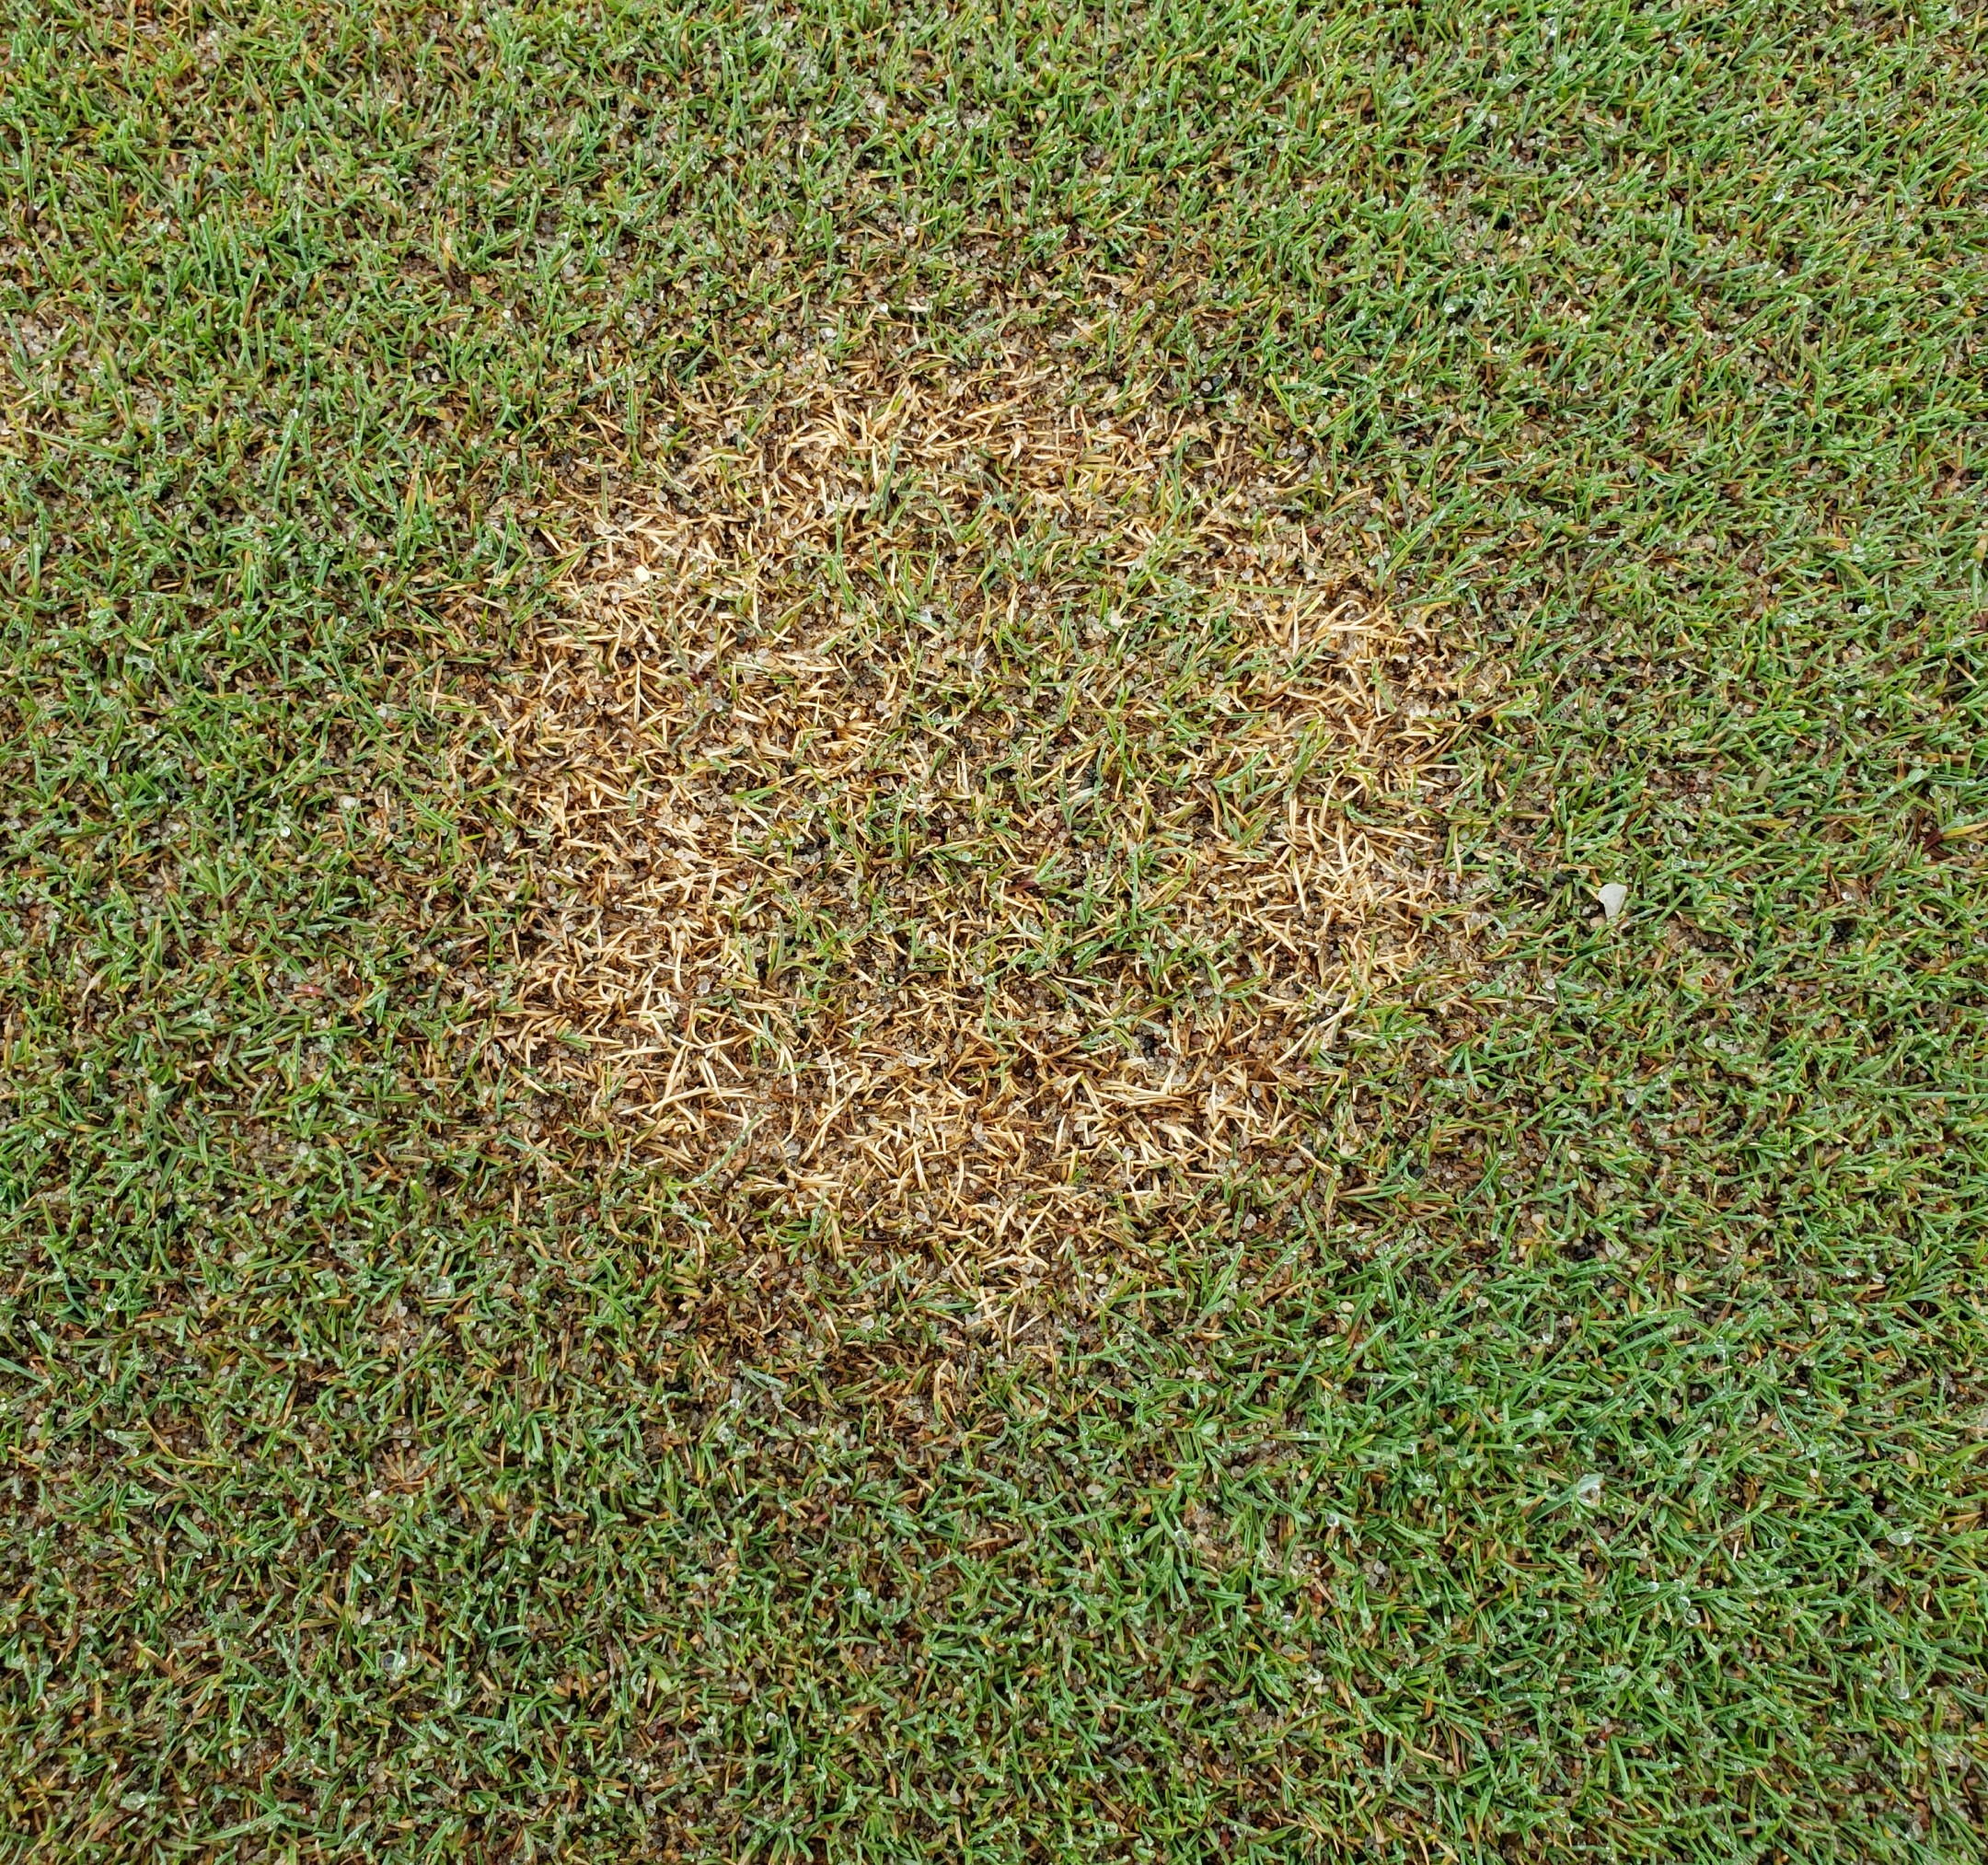 shortly mown turfgrass with a circular patch of damage from disease